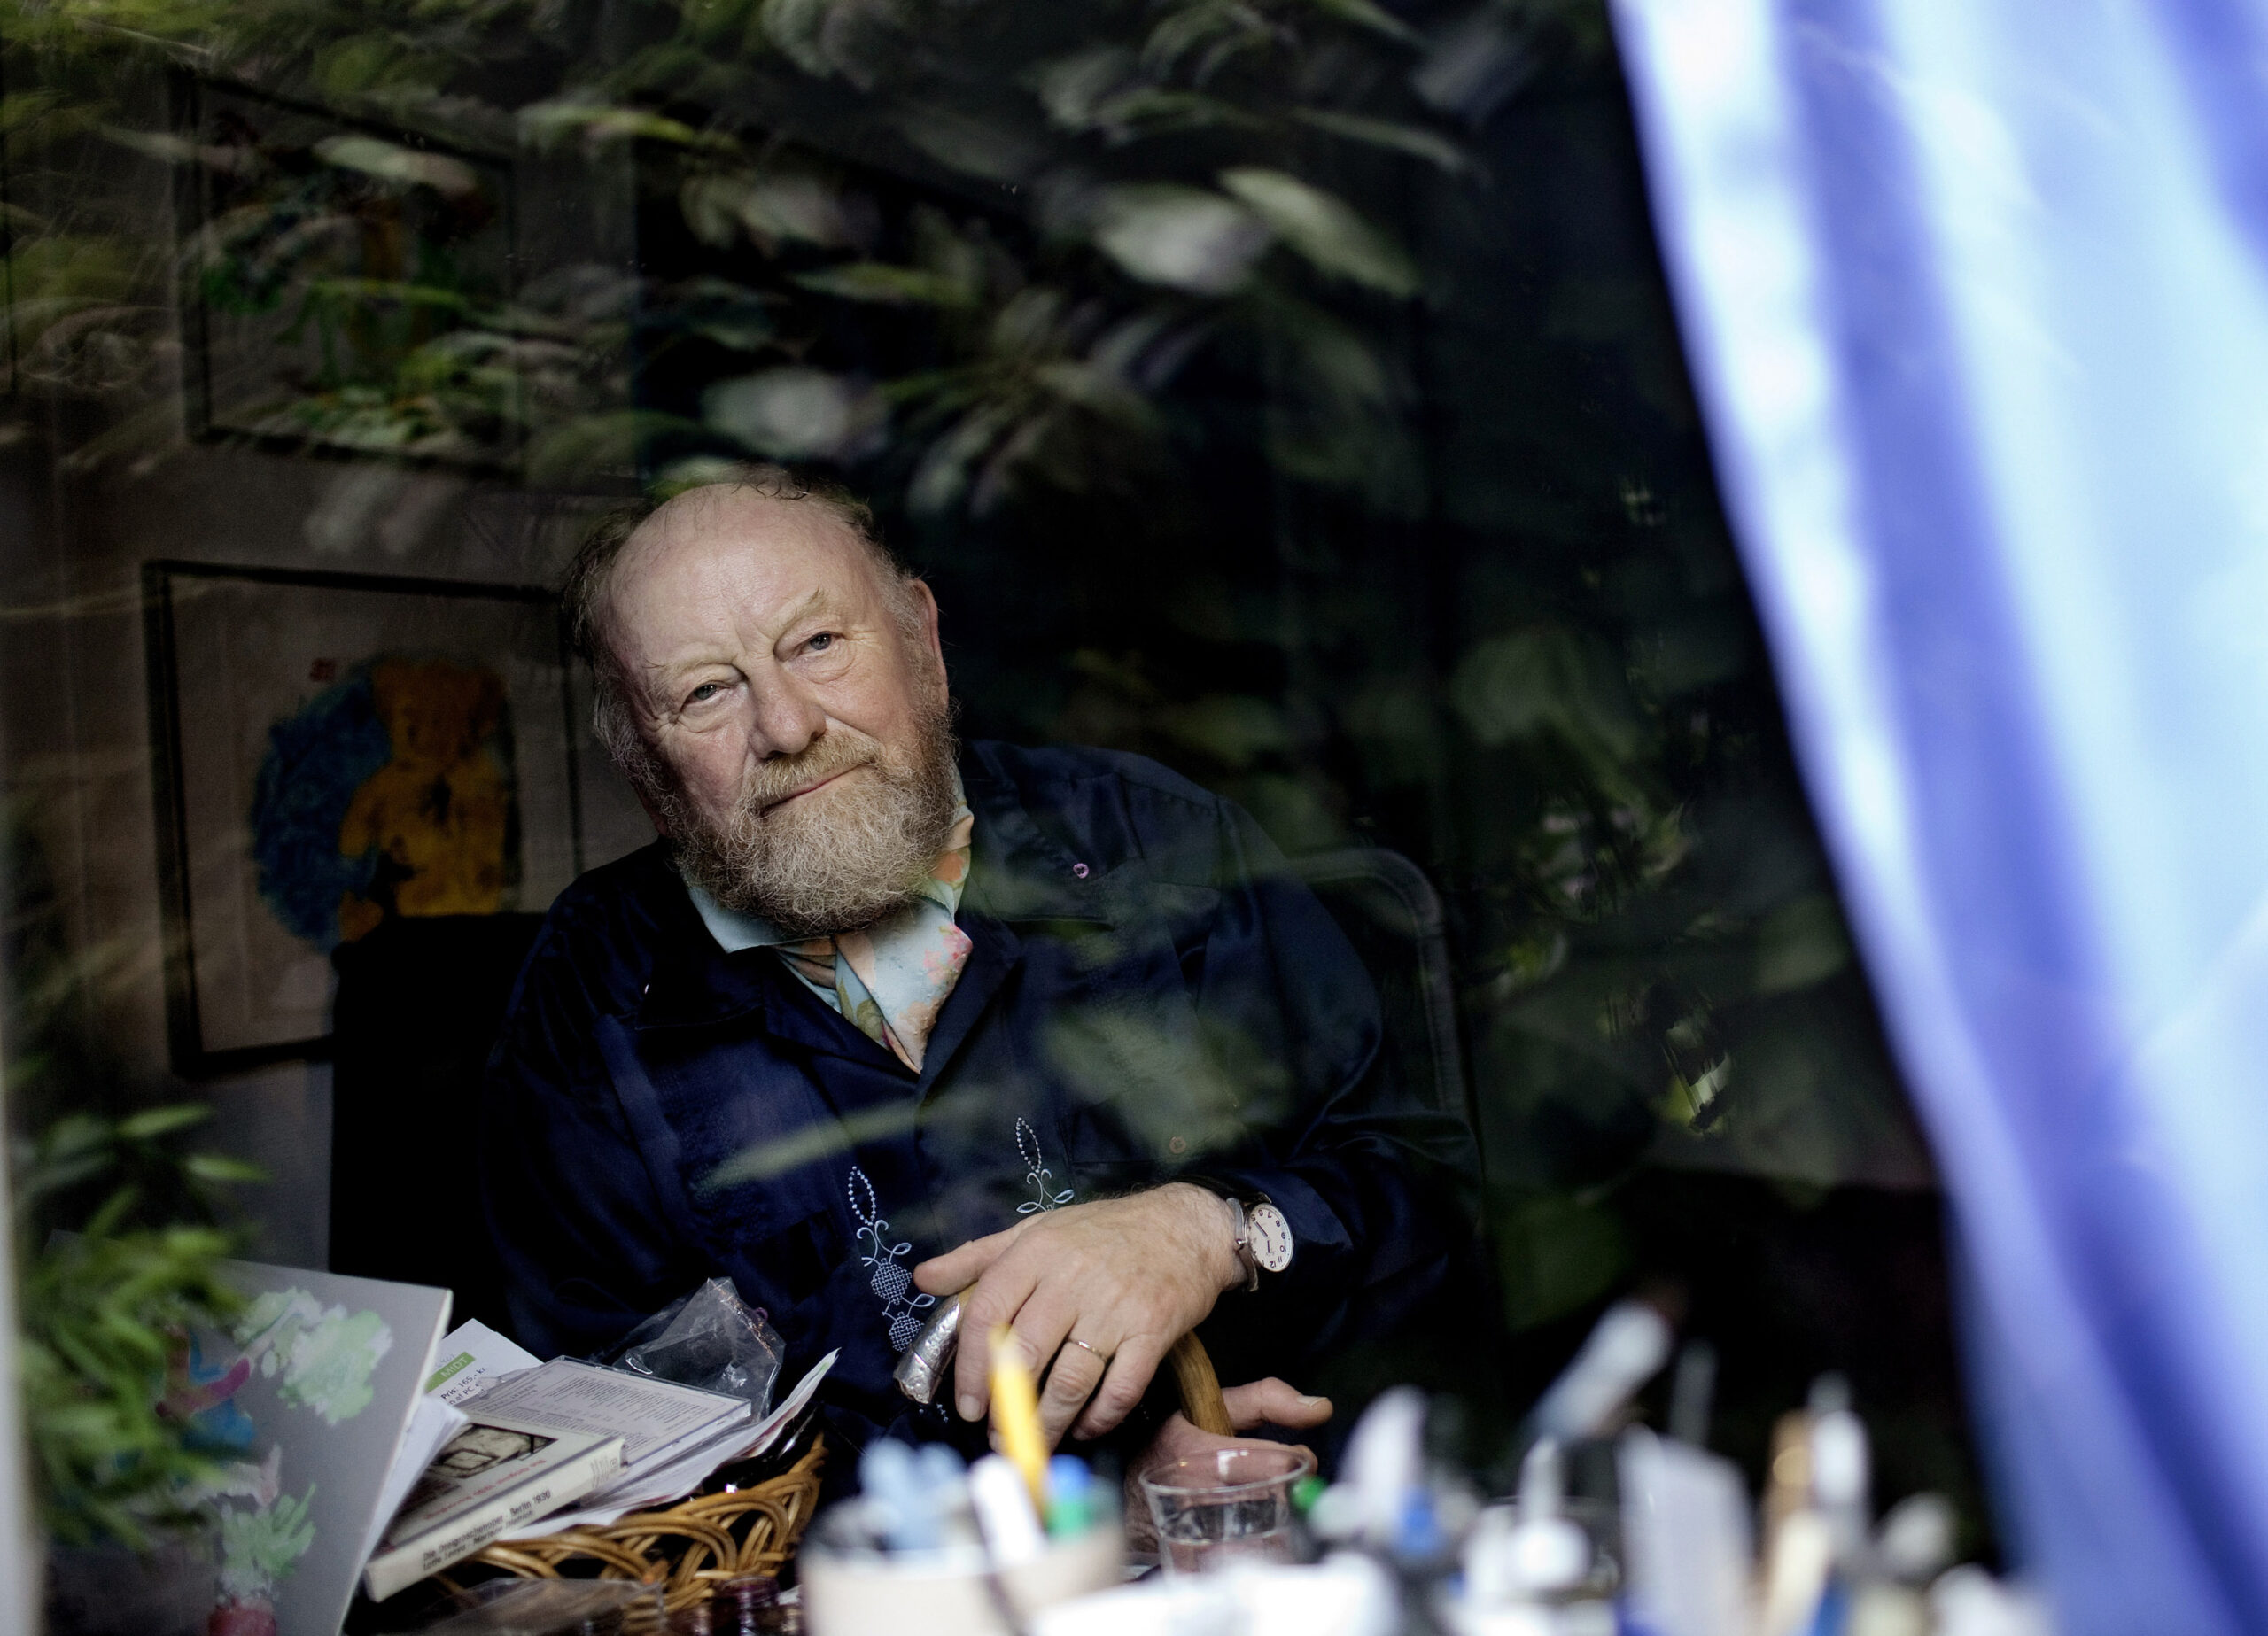 FILE - In this June 6, 2010 file photo, Danish cartoonist Kurt Westergaard is seen at his home near Aarhus, Denmark. Danish cartoonist Kurt Westergaard, whose image of the Prophet Muhammad wearing a bomb as a turban was at the center of widespread anti-Danish anger in the Muslim world in the mid-2000s, has died aged 86, Westergaard’s family announced Sunday July 18, 2021. (Peter Hove Olsen / Polfoto via AP, file)